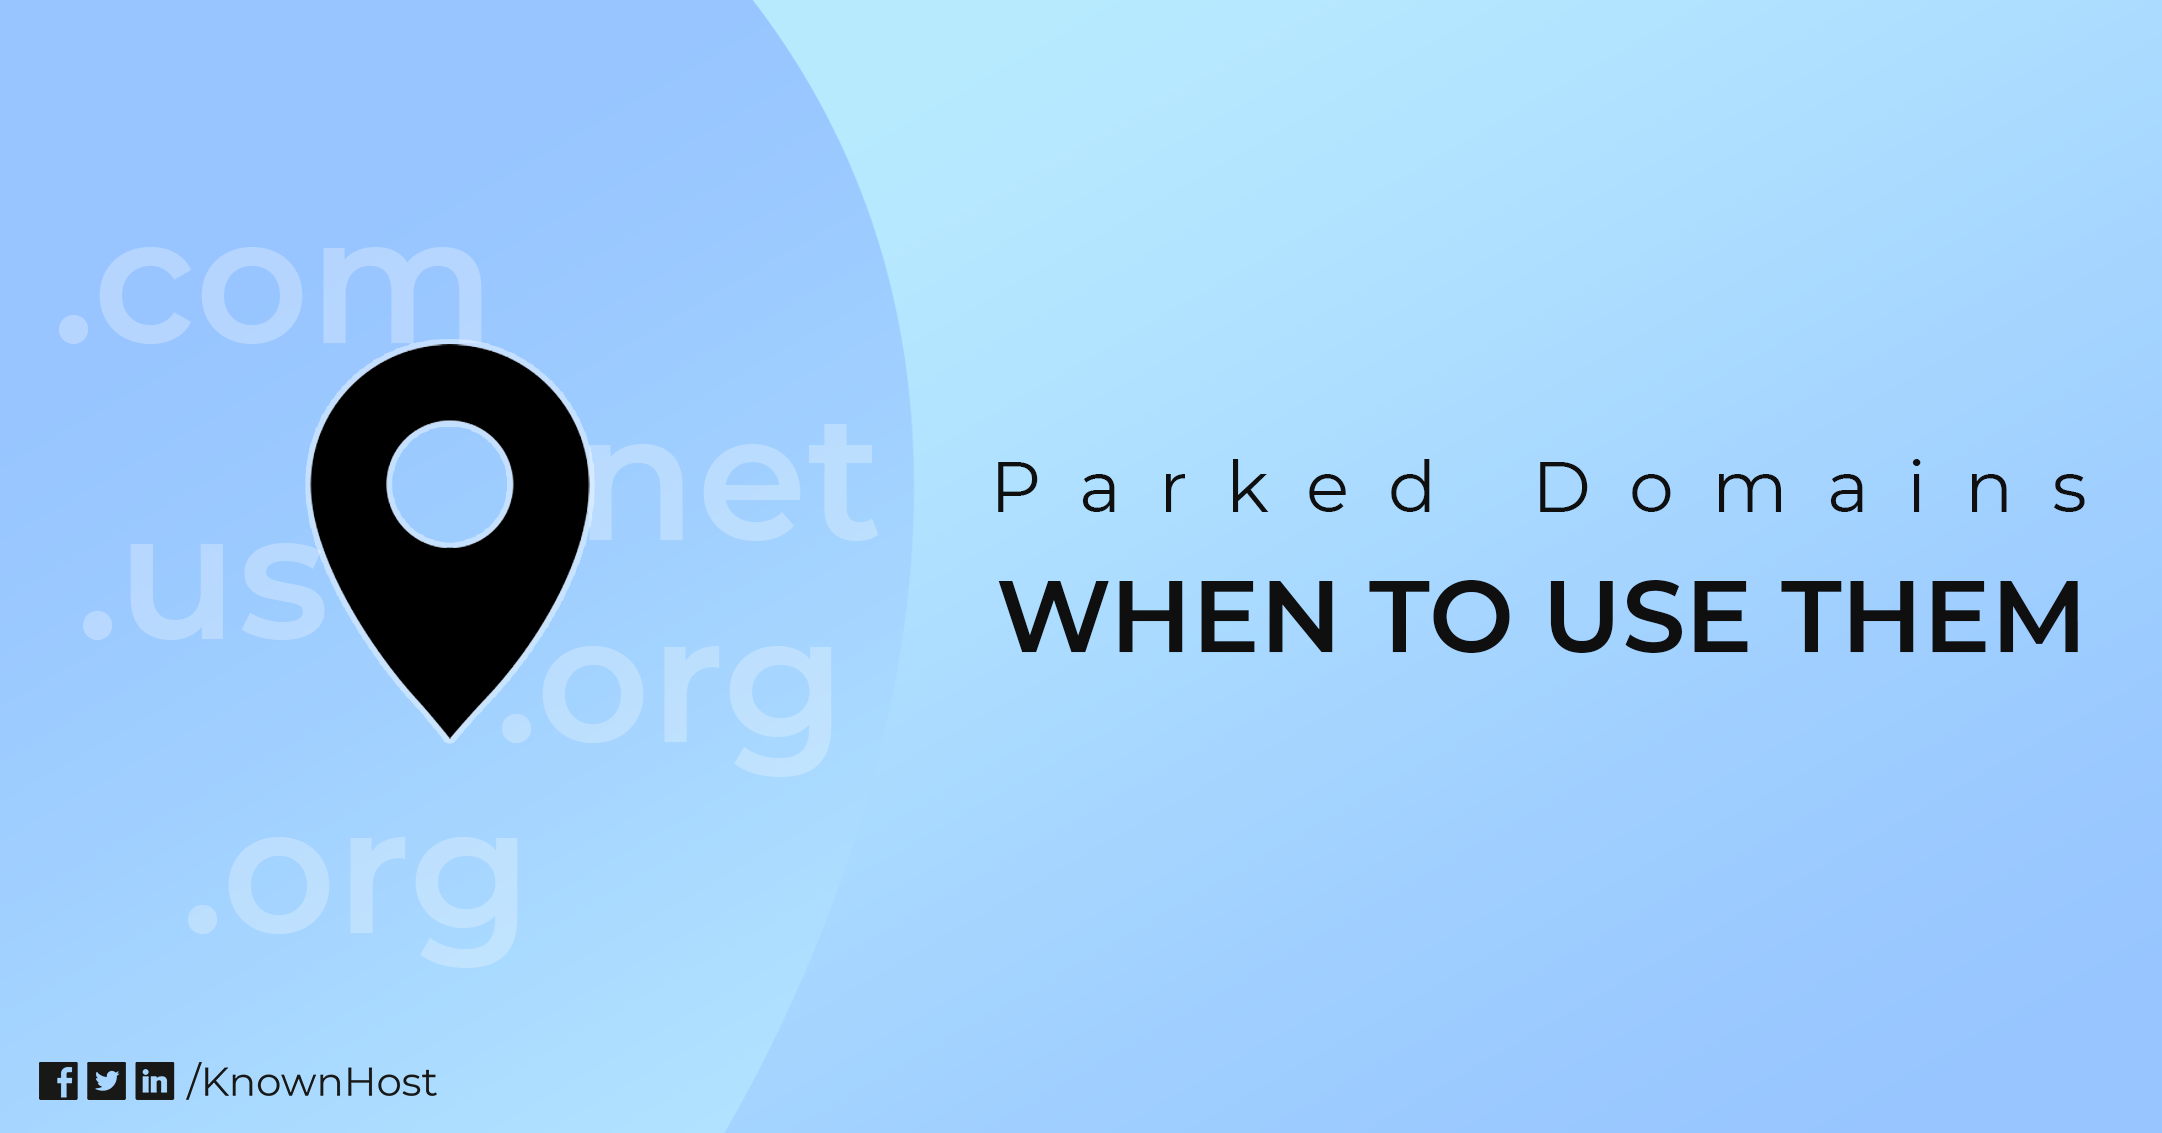 Parked Domains and When to Use Them